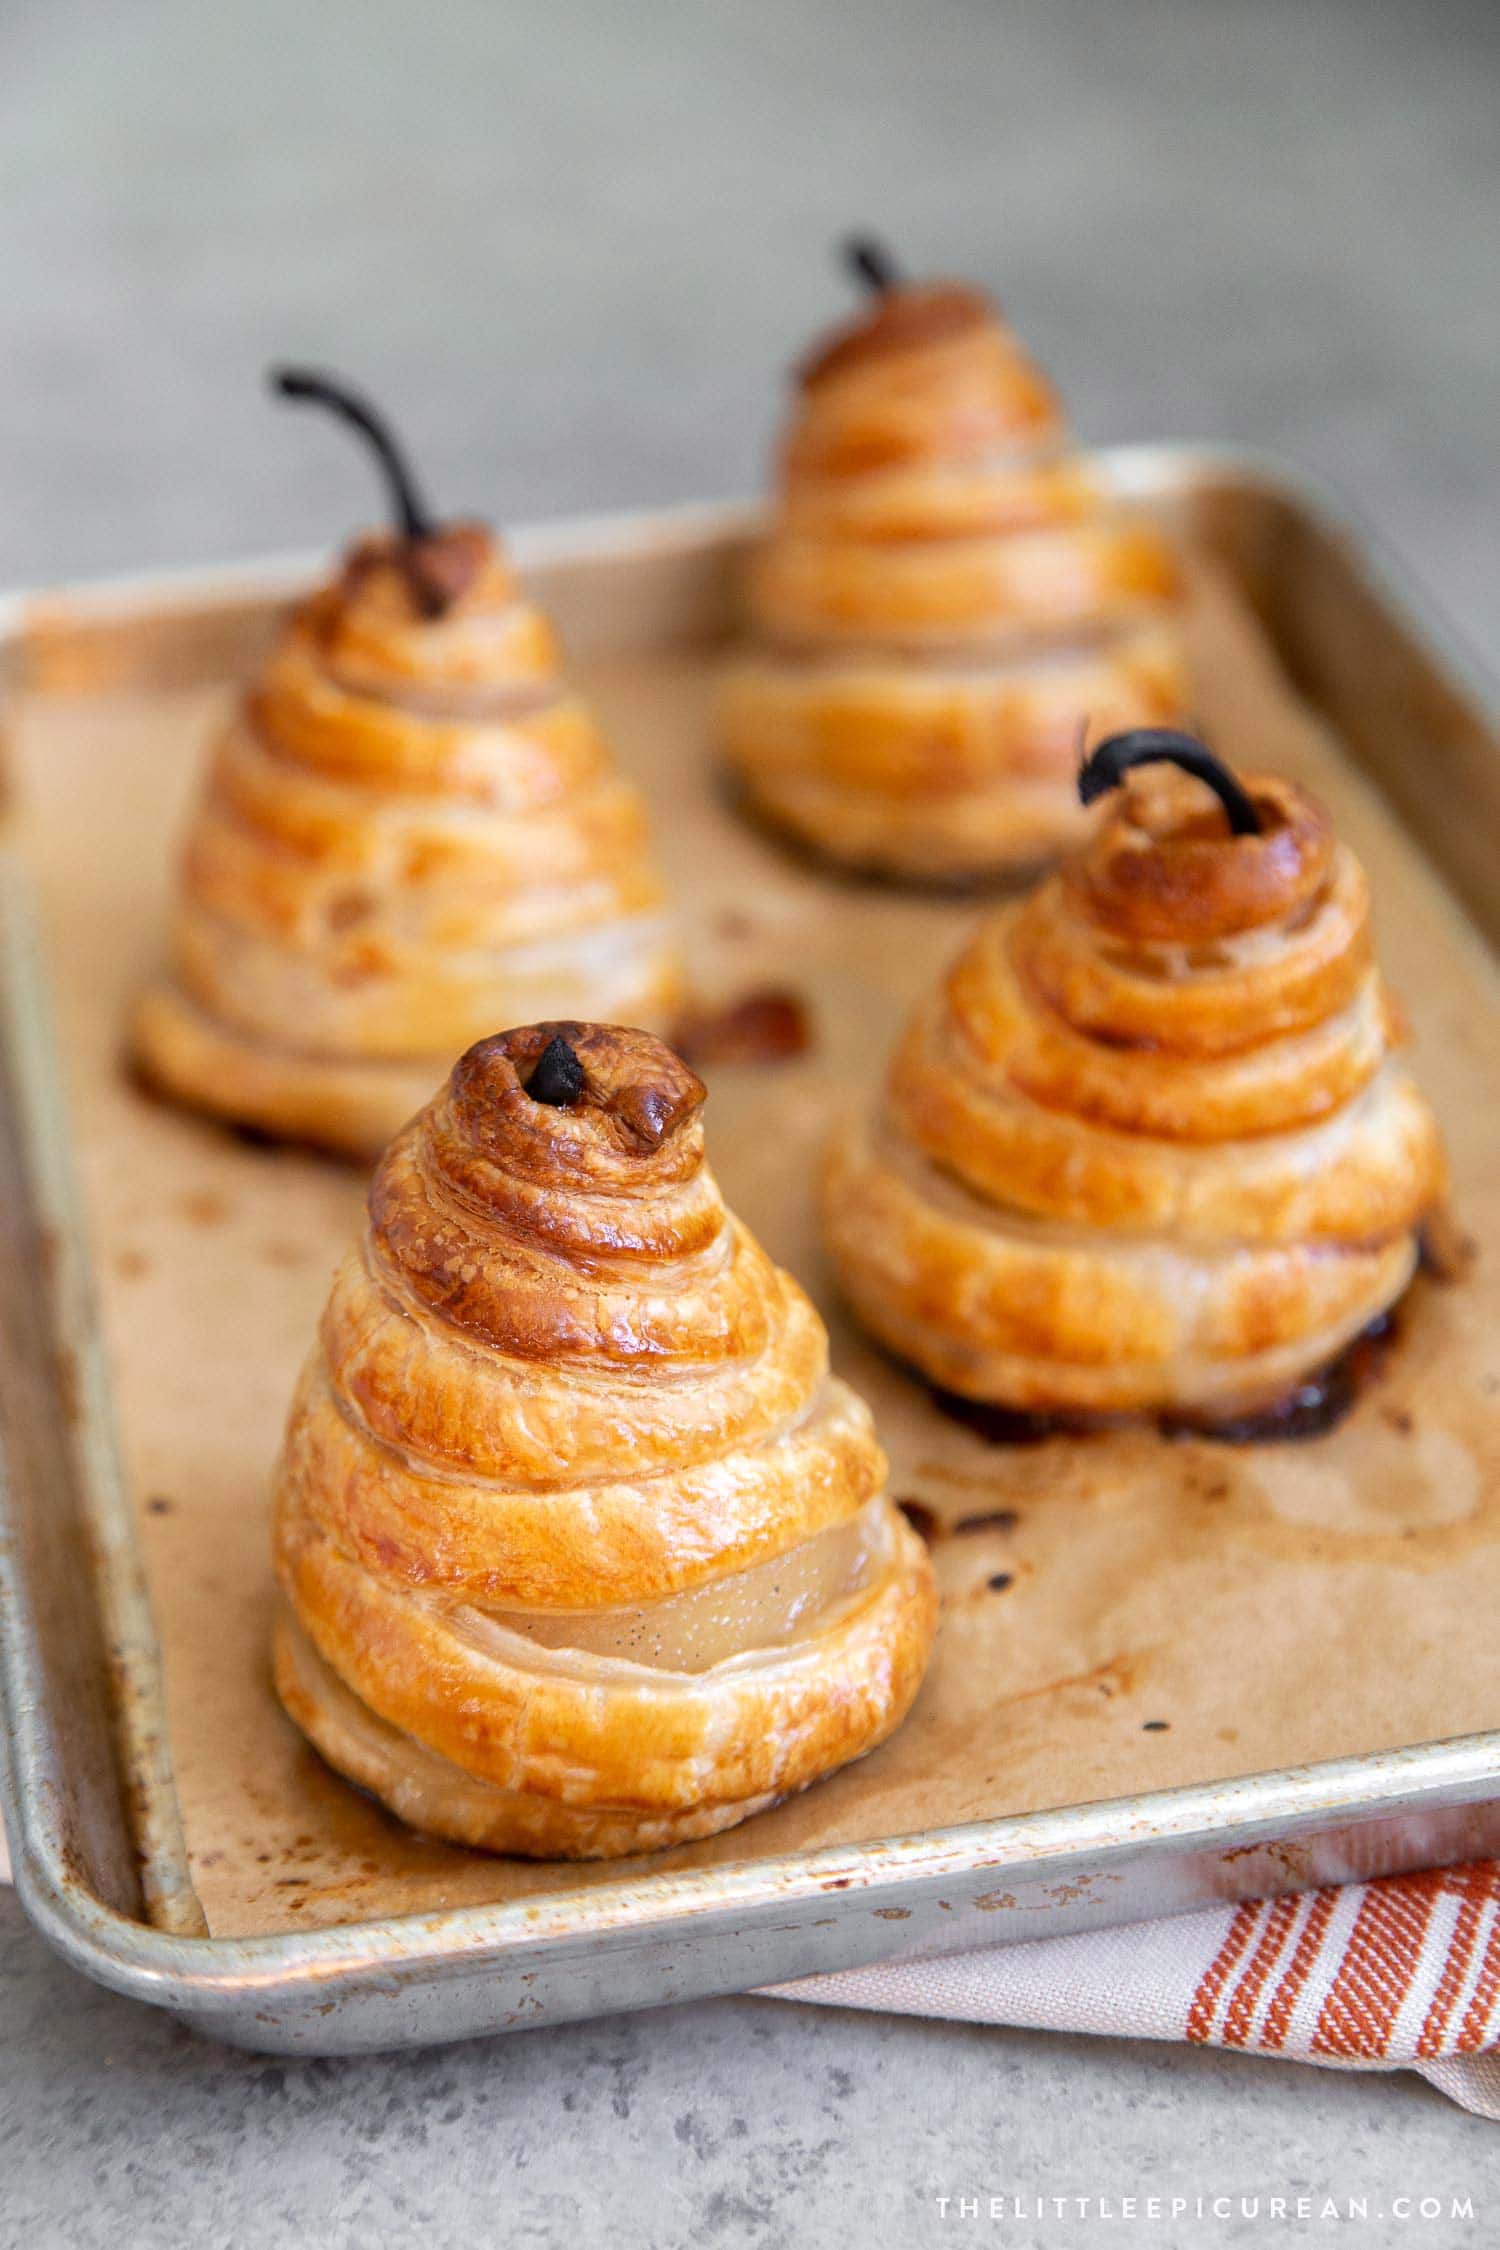 Honeyed Pears in Puff Pastry Recipe: How to Make It